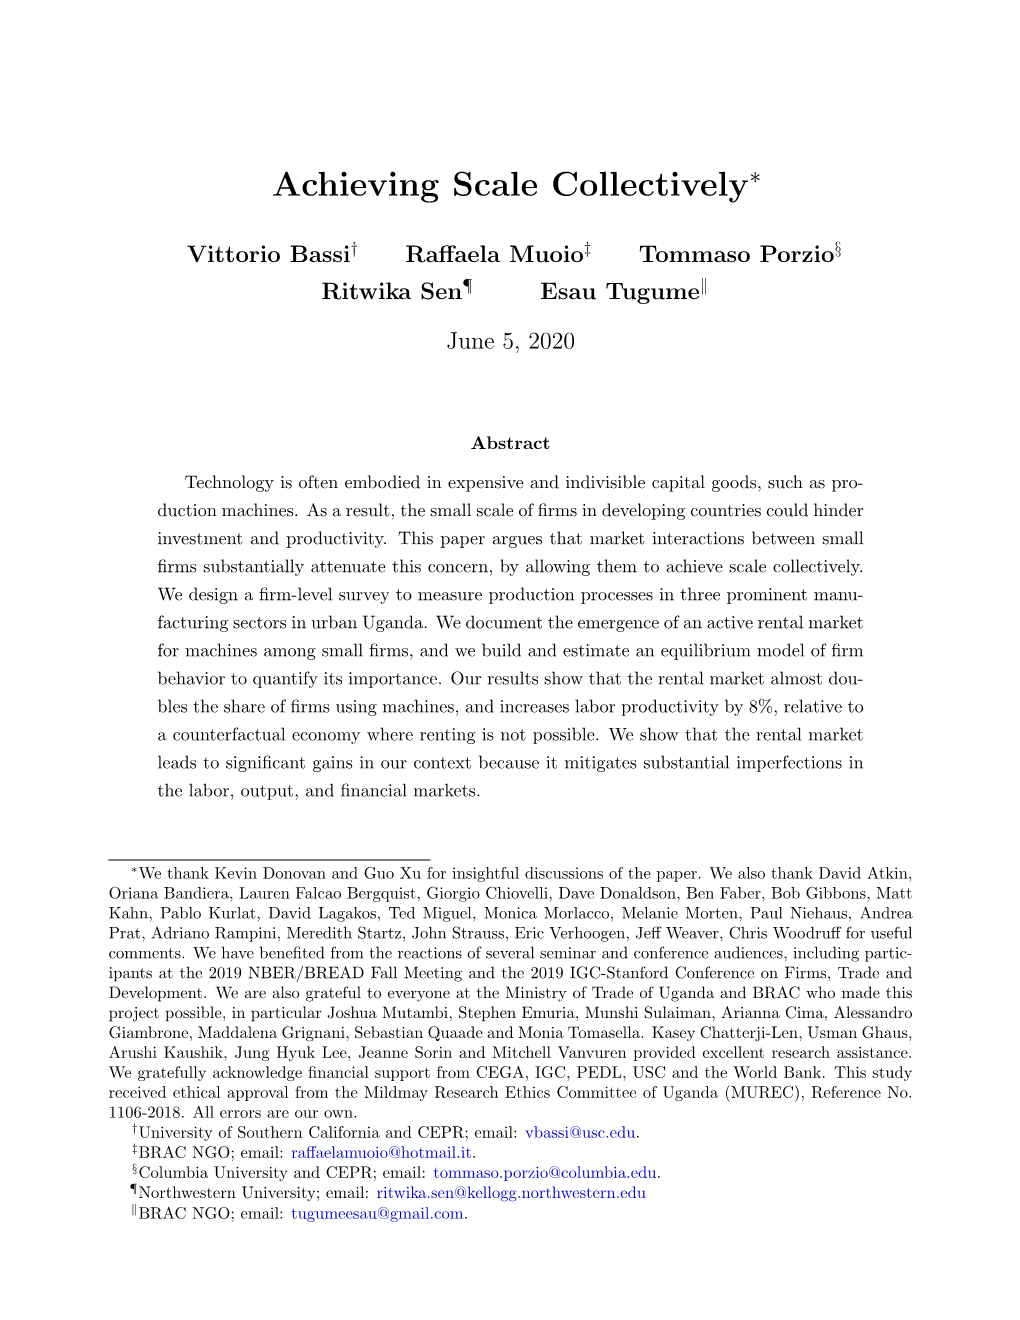 Achieving Scale Collectivelywe Thank Kevin Donovan and Guo Xu for Insightful Discussions of the Paper. We Also Thank David Atkin